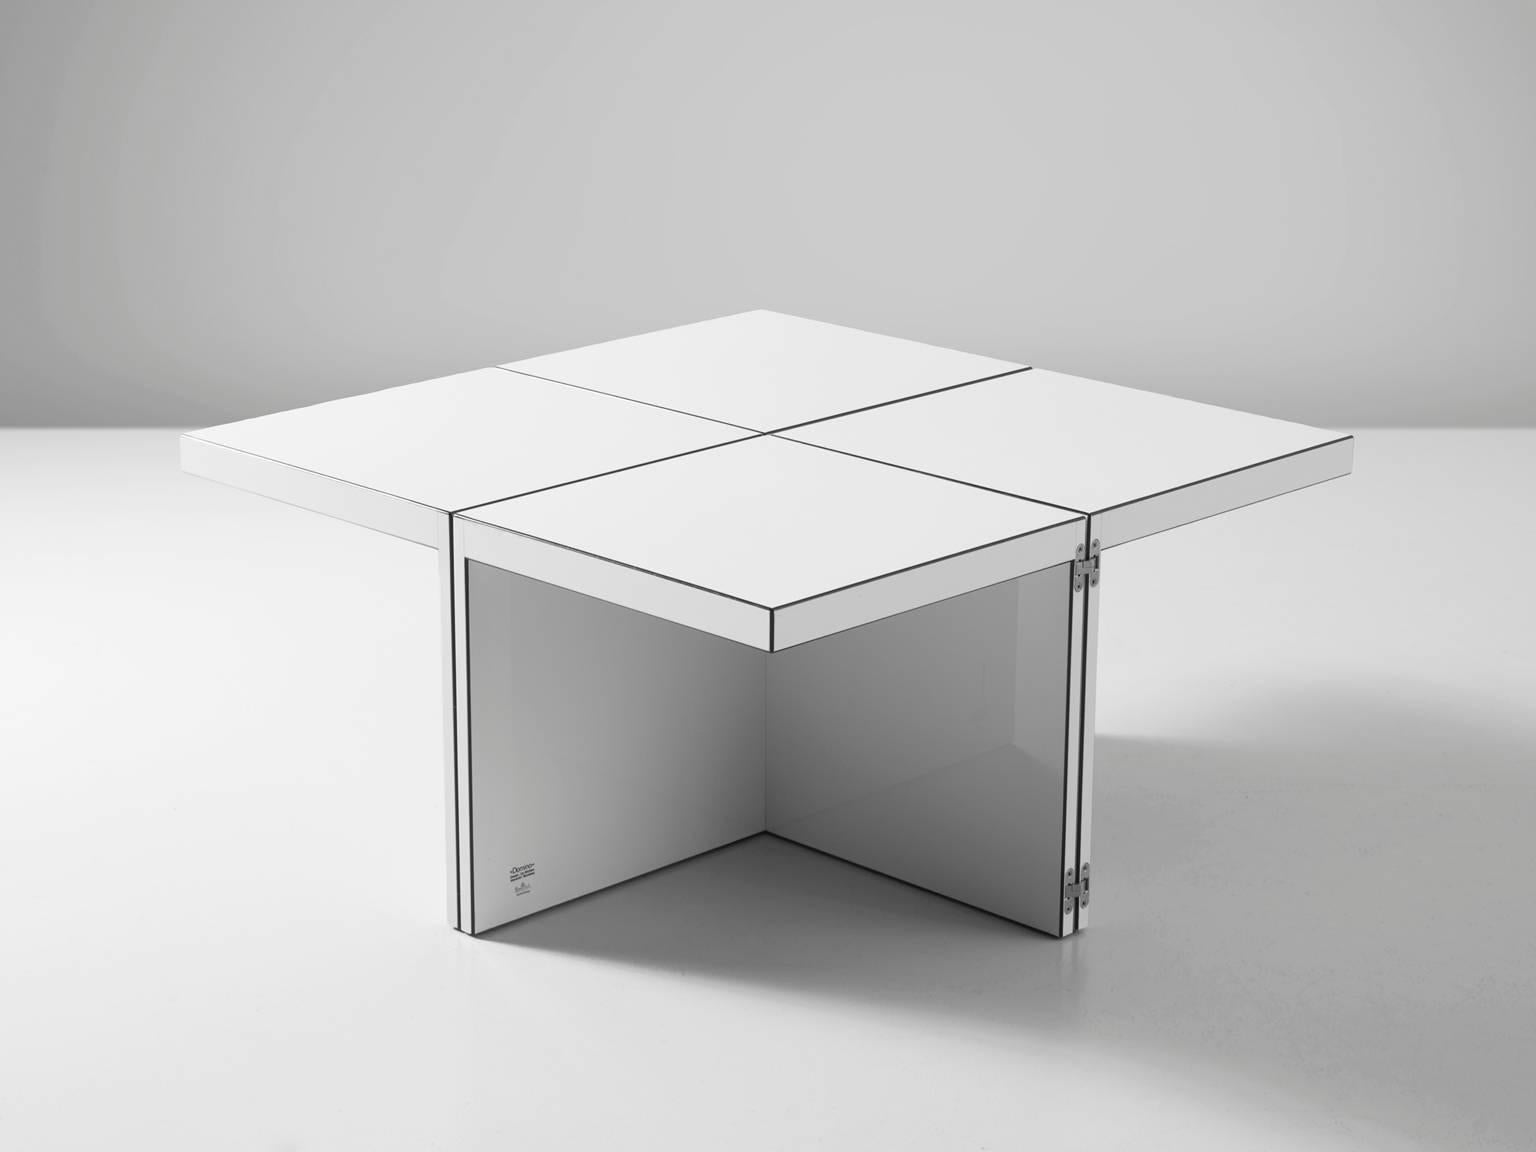 German 'Domino' Coffee Table by Jan Wichers and Alexander Blomberg